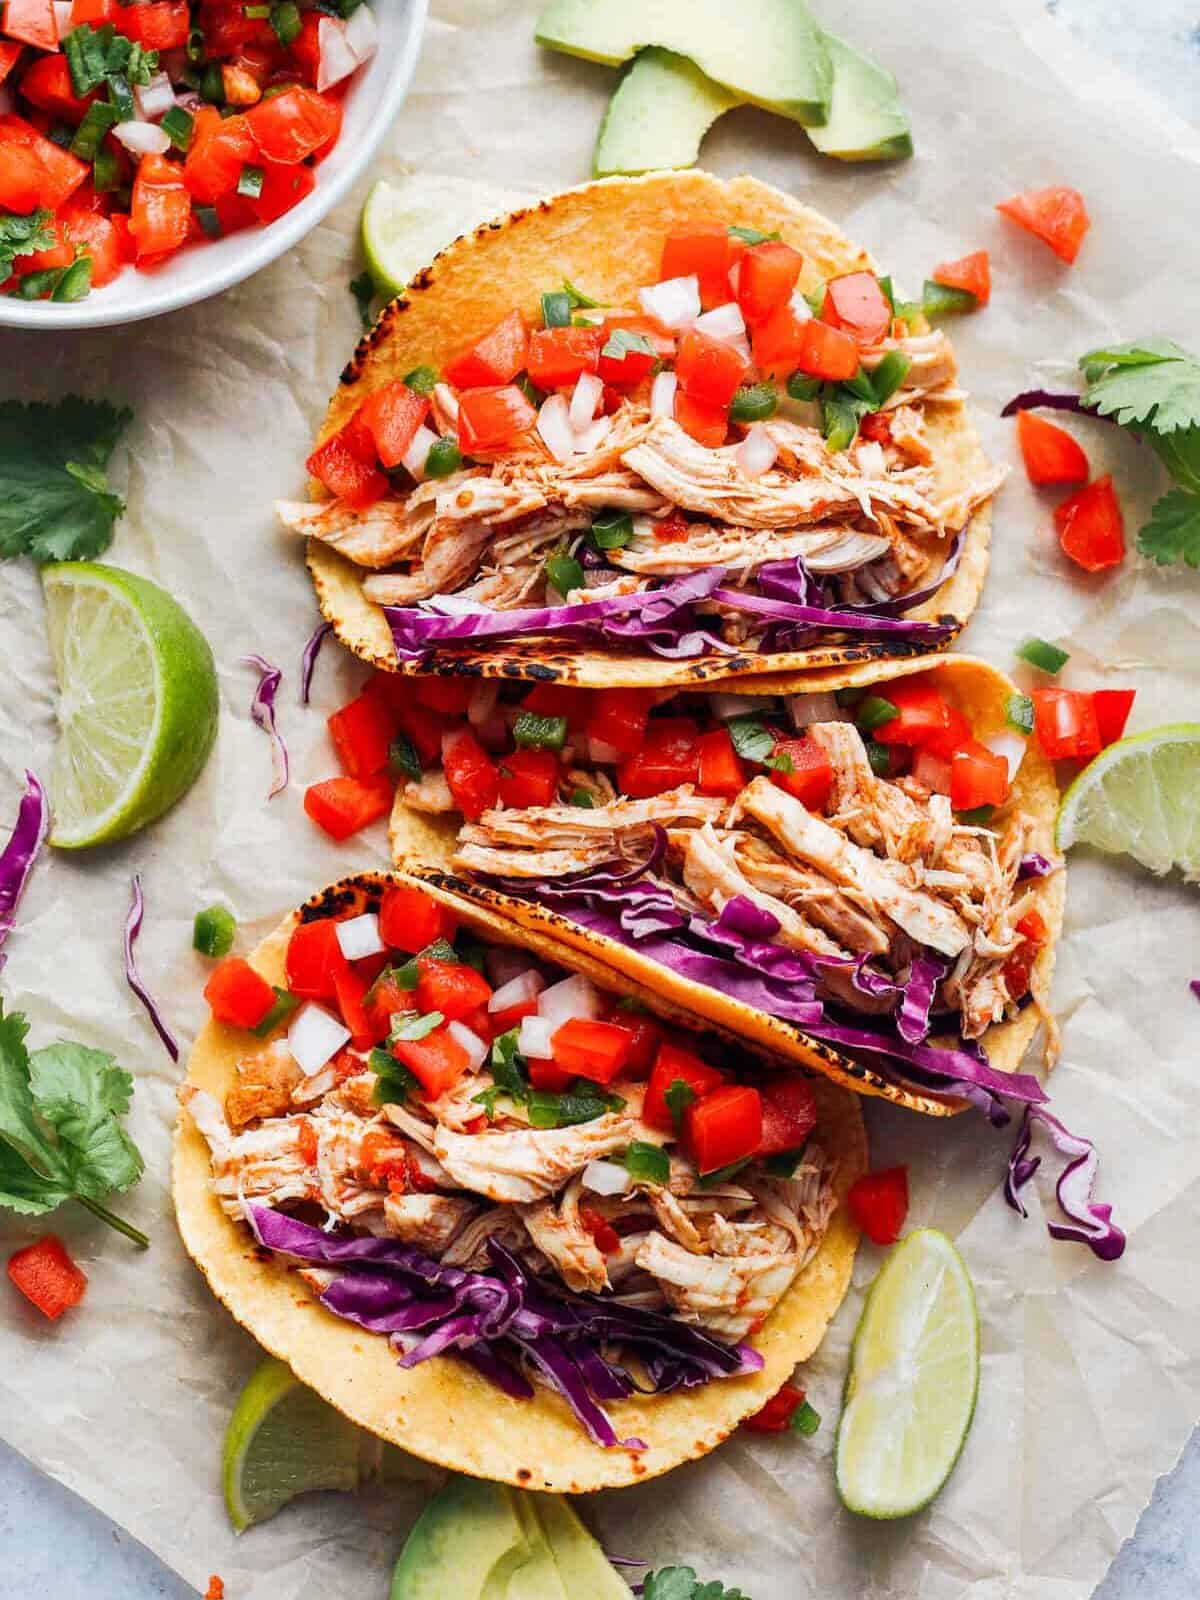 3 Instant Pot chicken tacos topped with purple cabbage and Pico de Gallo; with other fresh ingredients scattered around them.